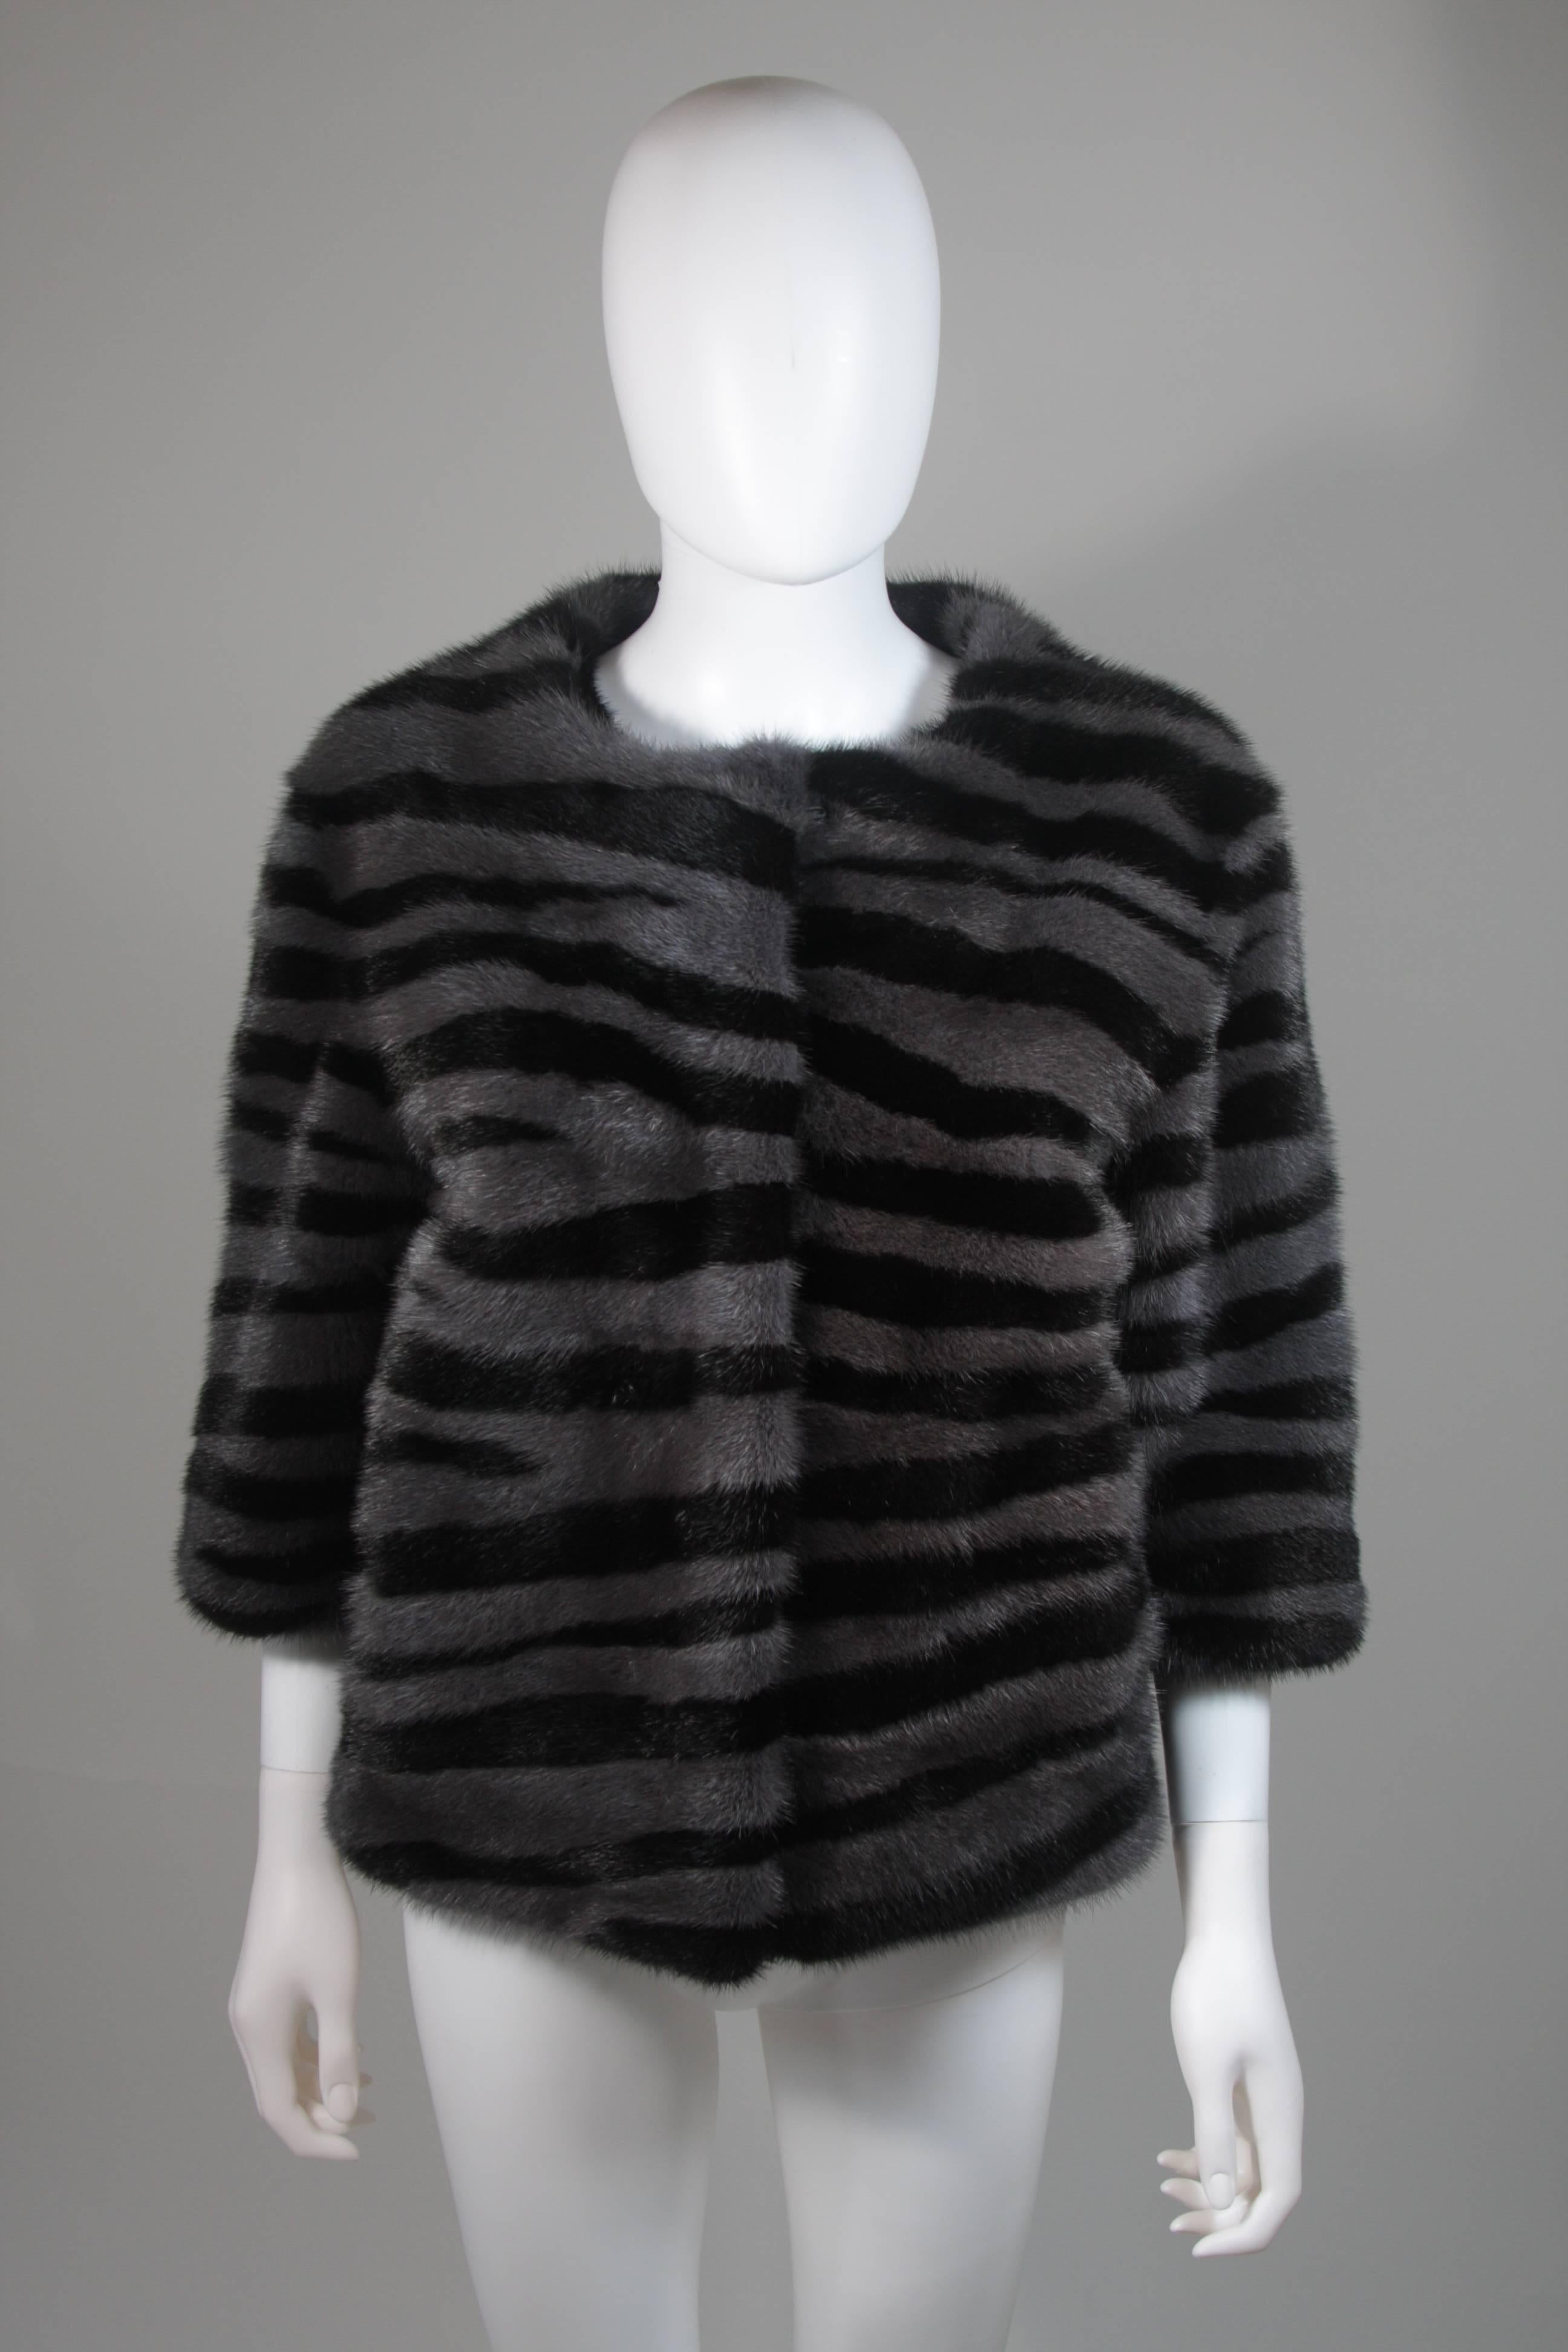 This Marc Jacobs design is available for viewing at our Beverly Hills Boutique. We offer a large selection of evening gowns and luxury garments. 

 This jacket is composed of mink in black and grey with striped patterning. There are center front